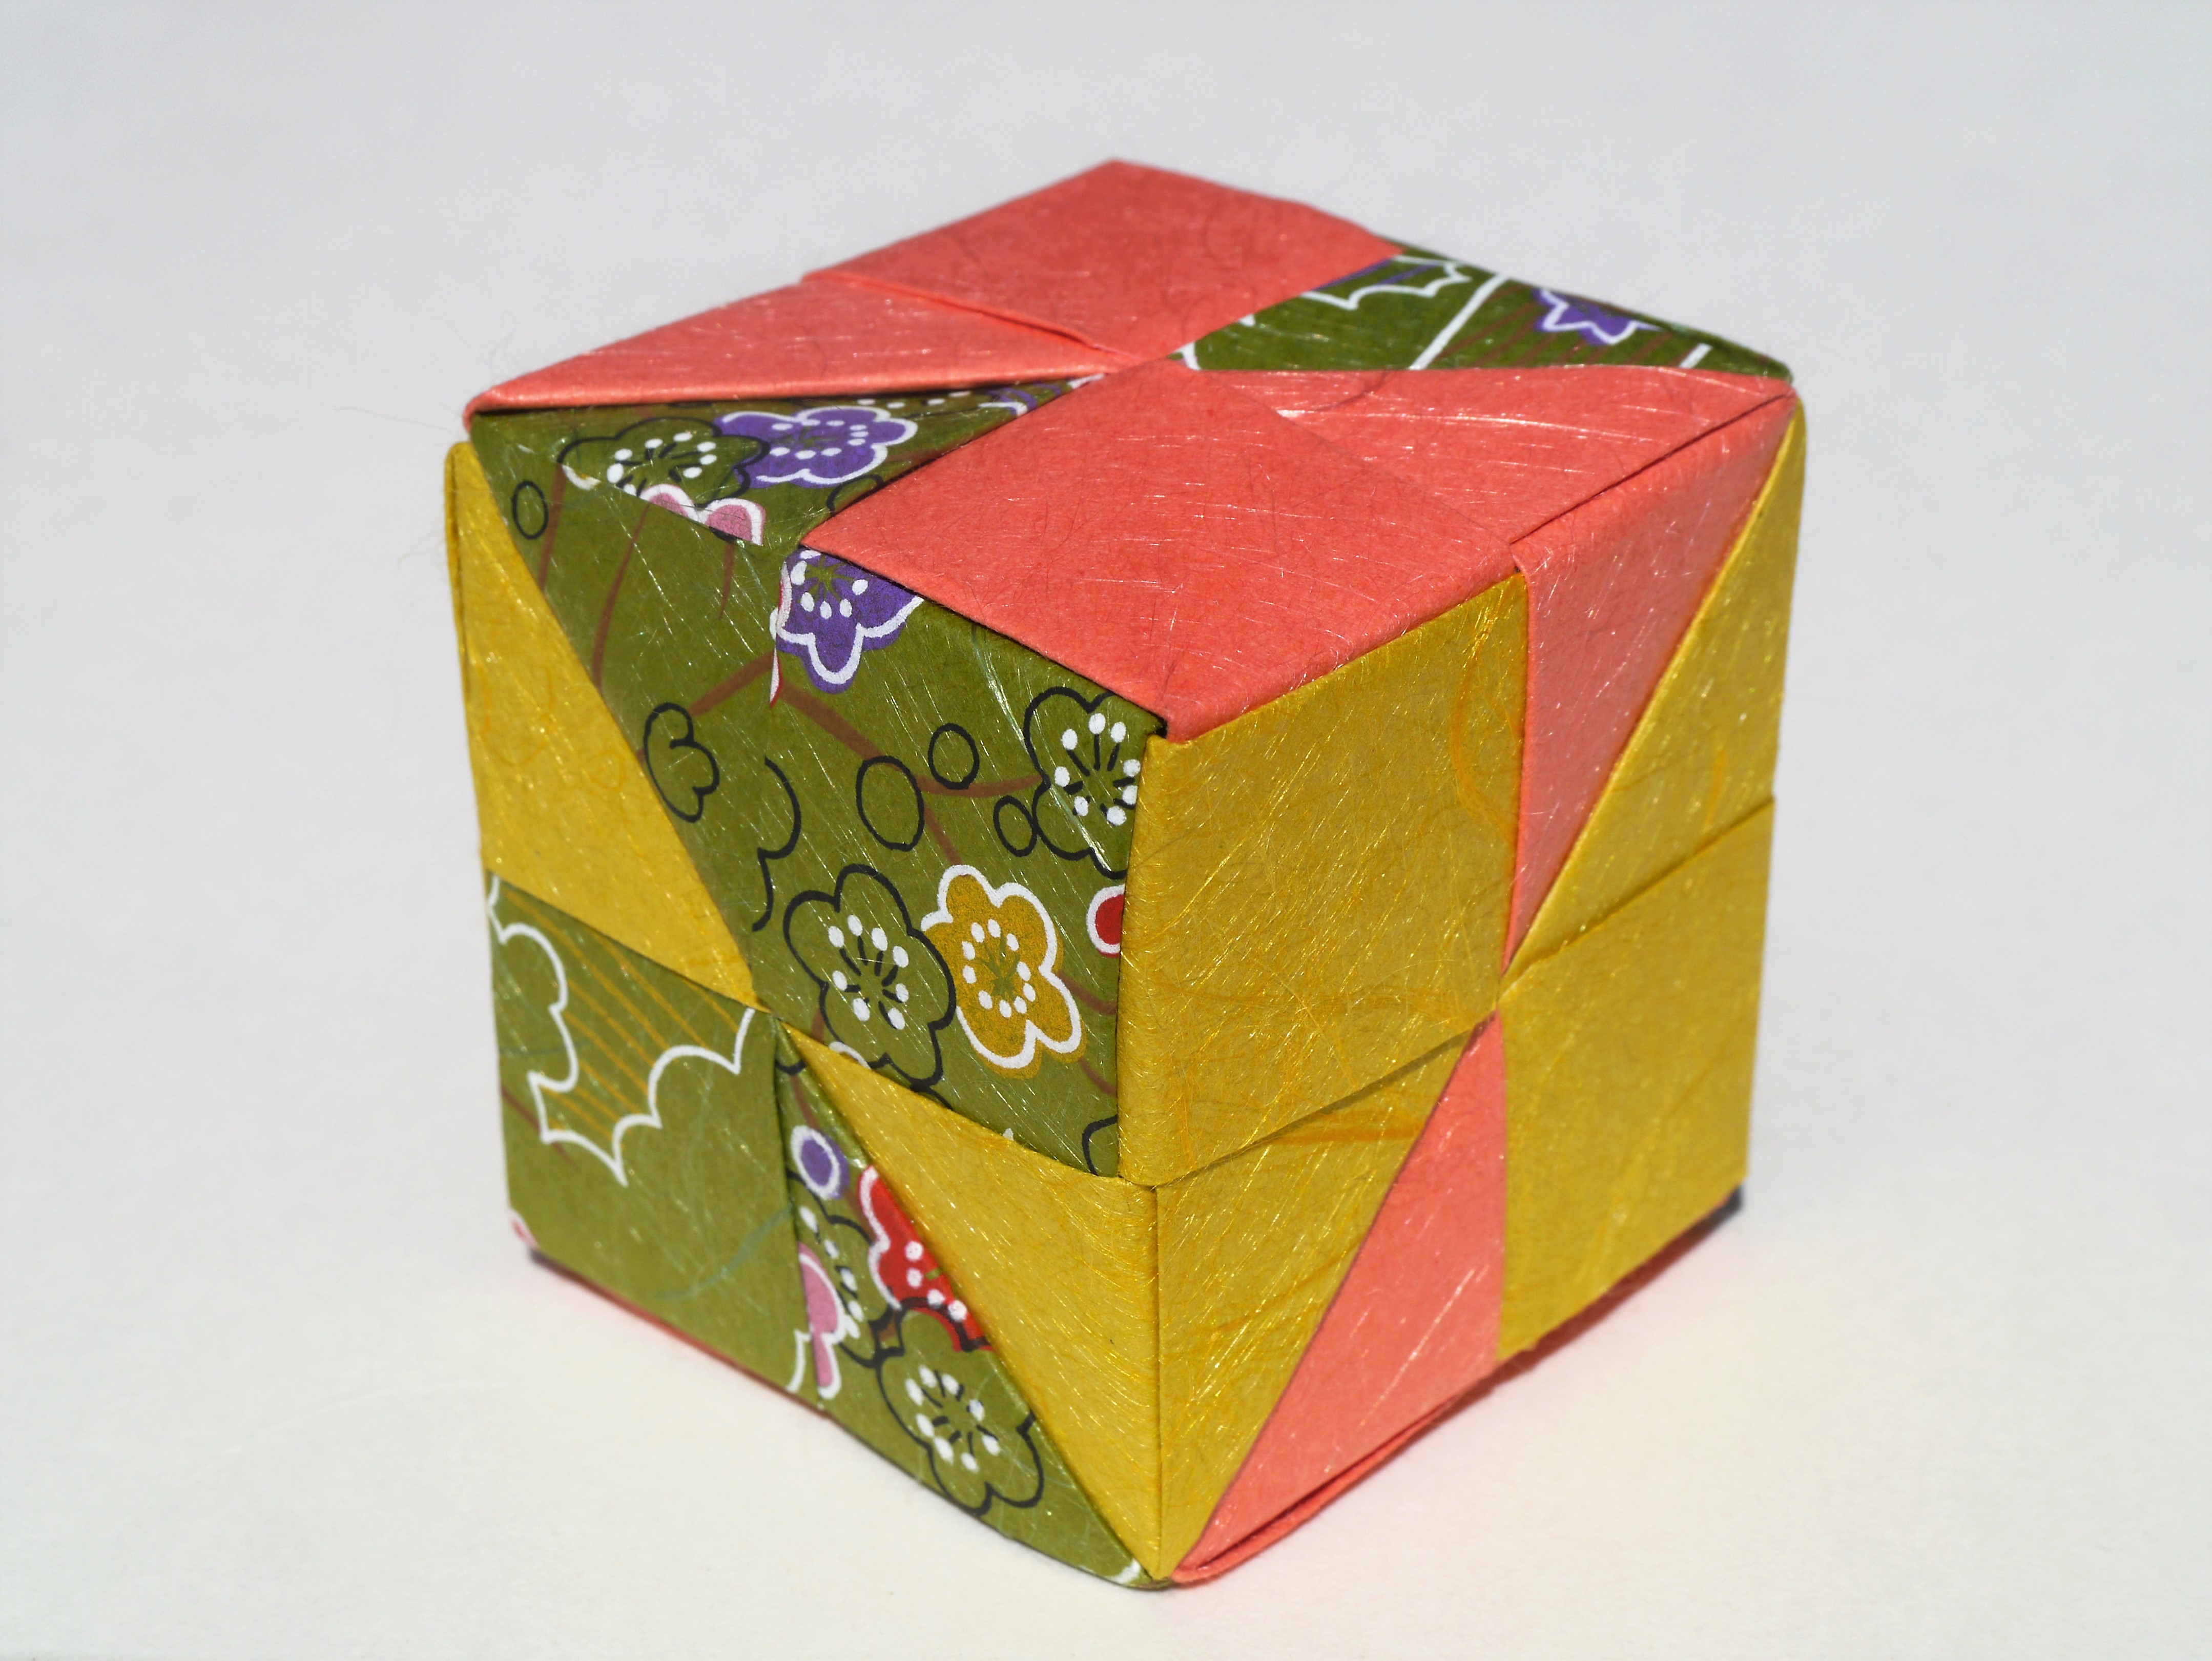 You just learned how to make an origami cube!